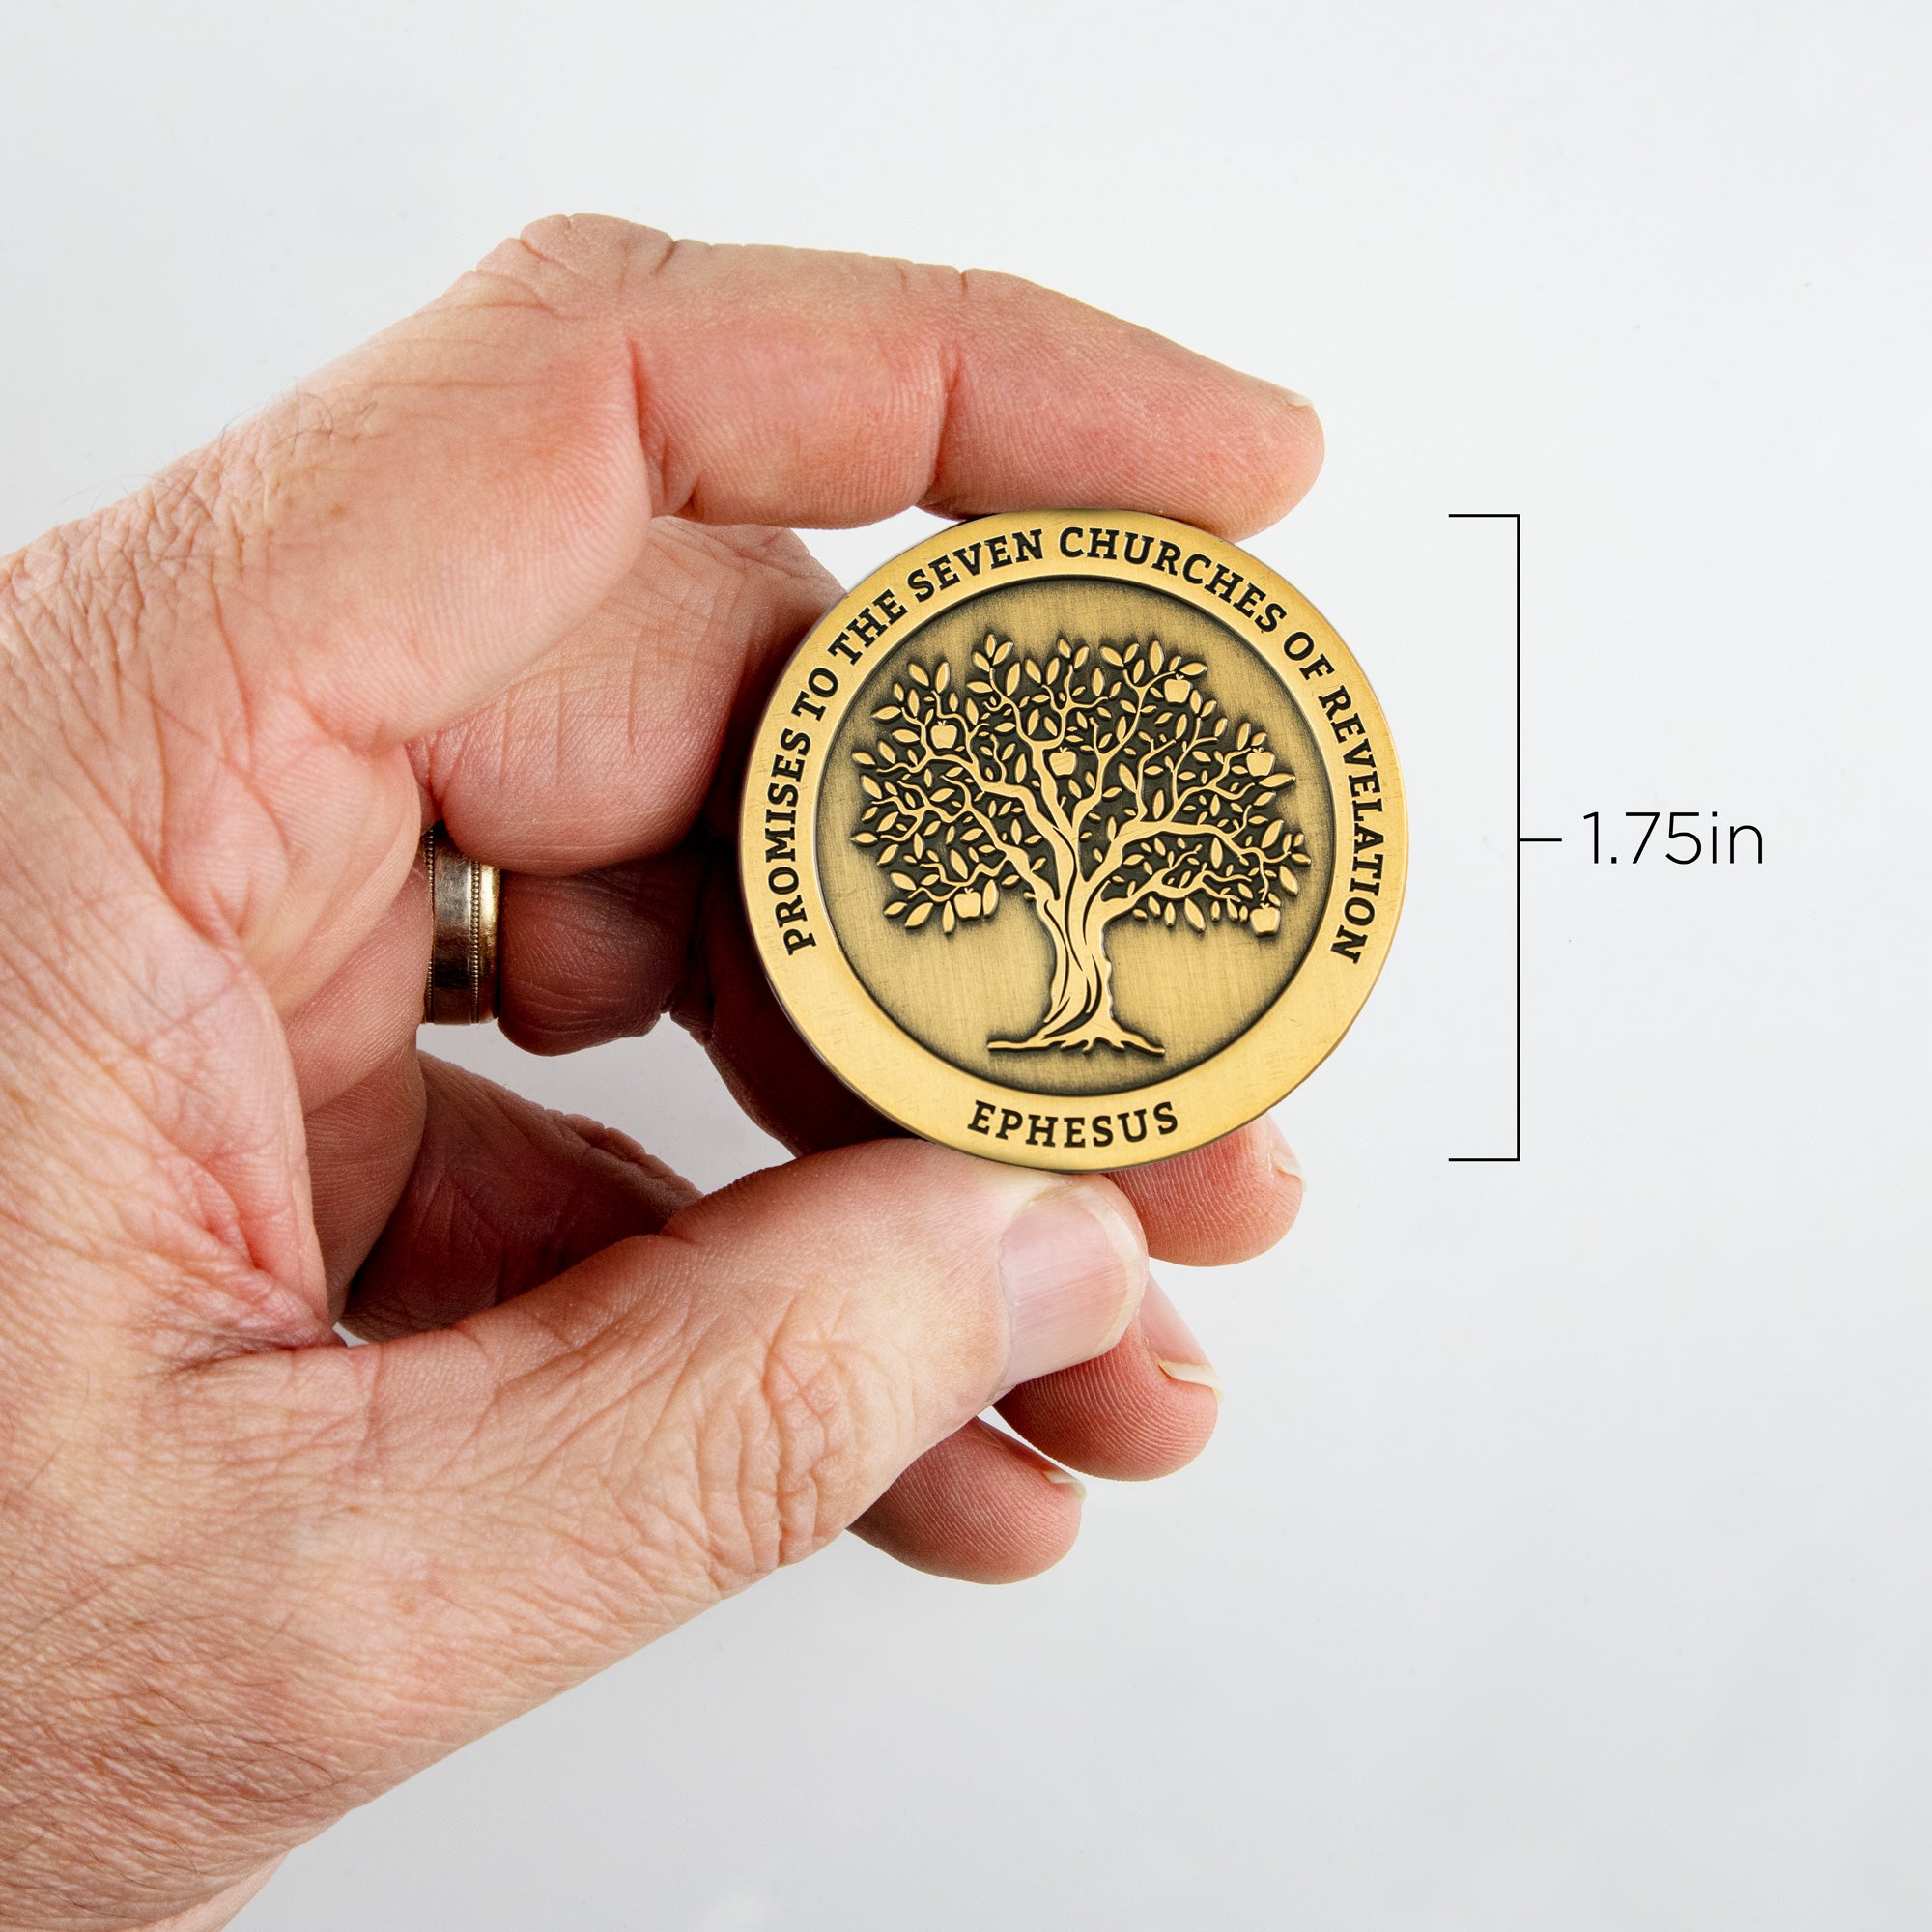 Ephesus, Seven Churches of Revelation Antique Gold Plated Challenge Coin in hand for size reference